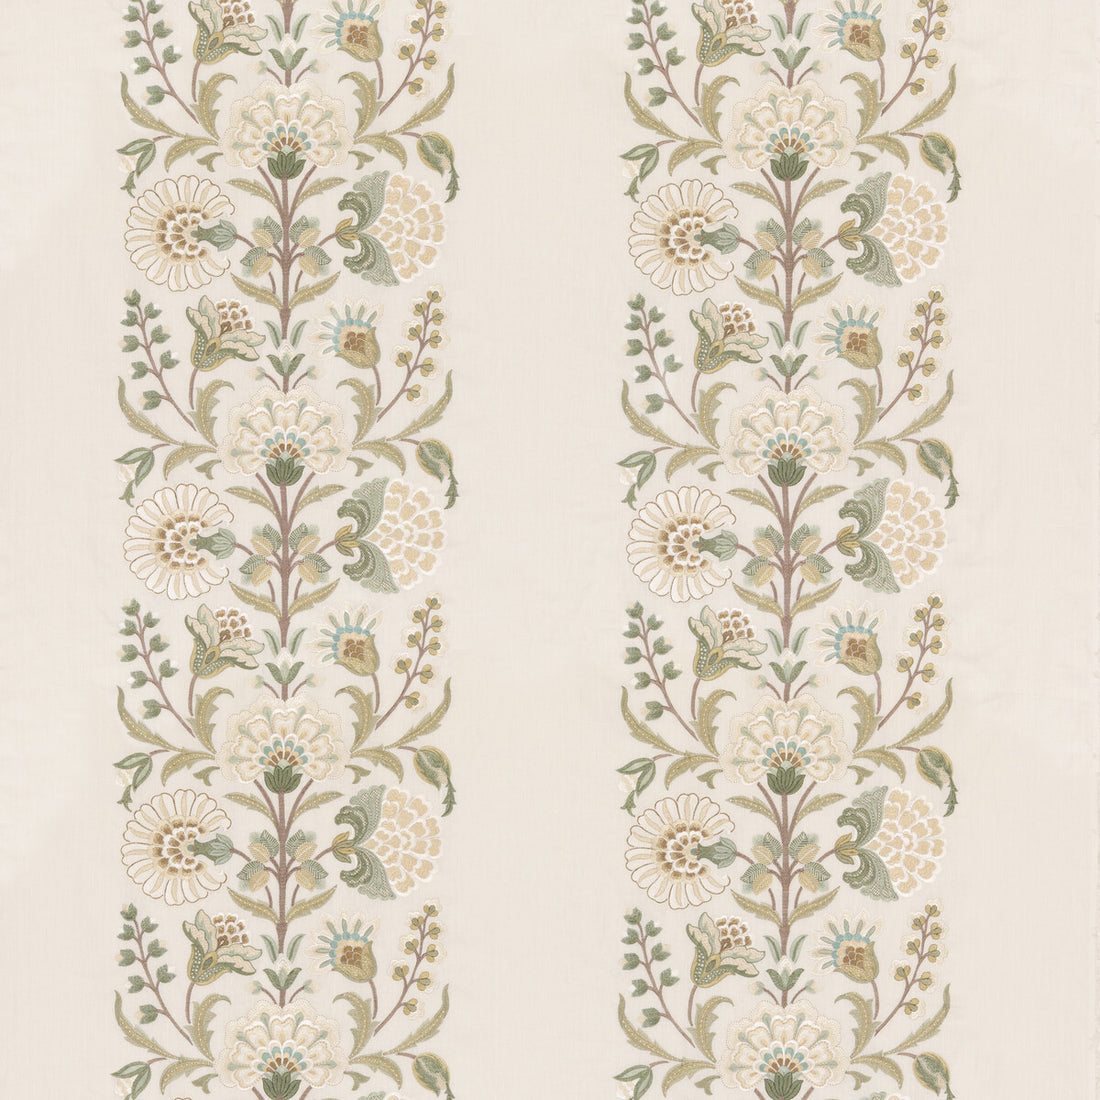 Annesley fabric in green color - pattern BF10997.2.0 - by G P &amp; J Baker in the Original Brantwood Fabric collection